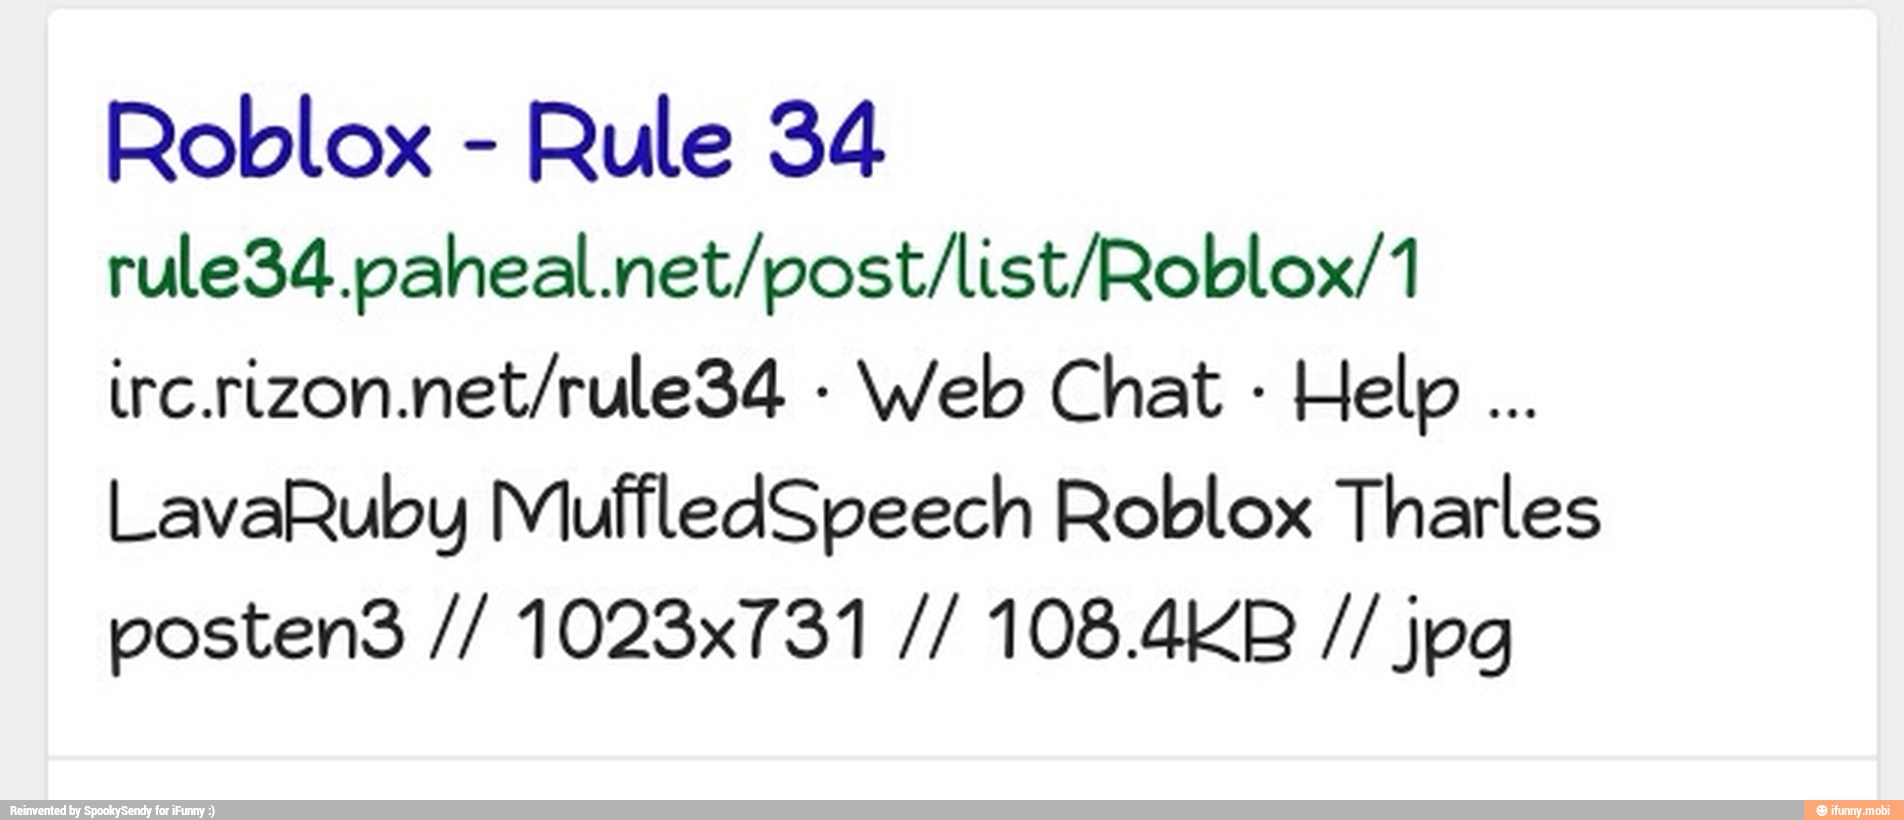 roblox rule online dating